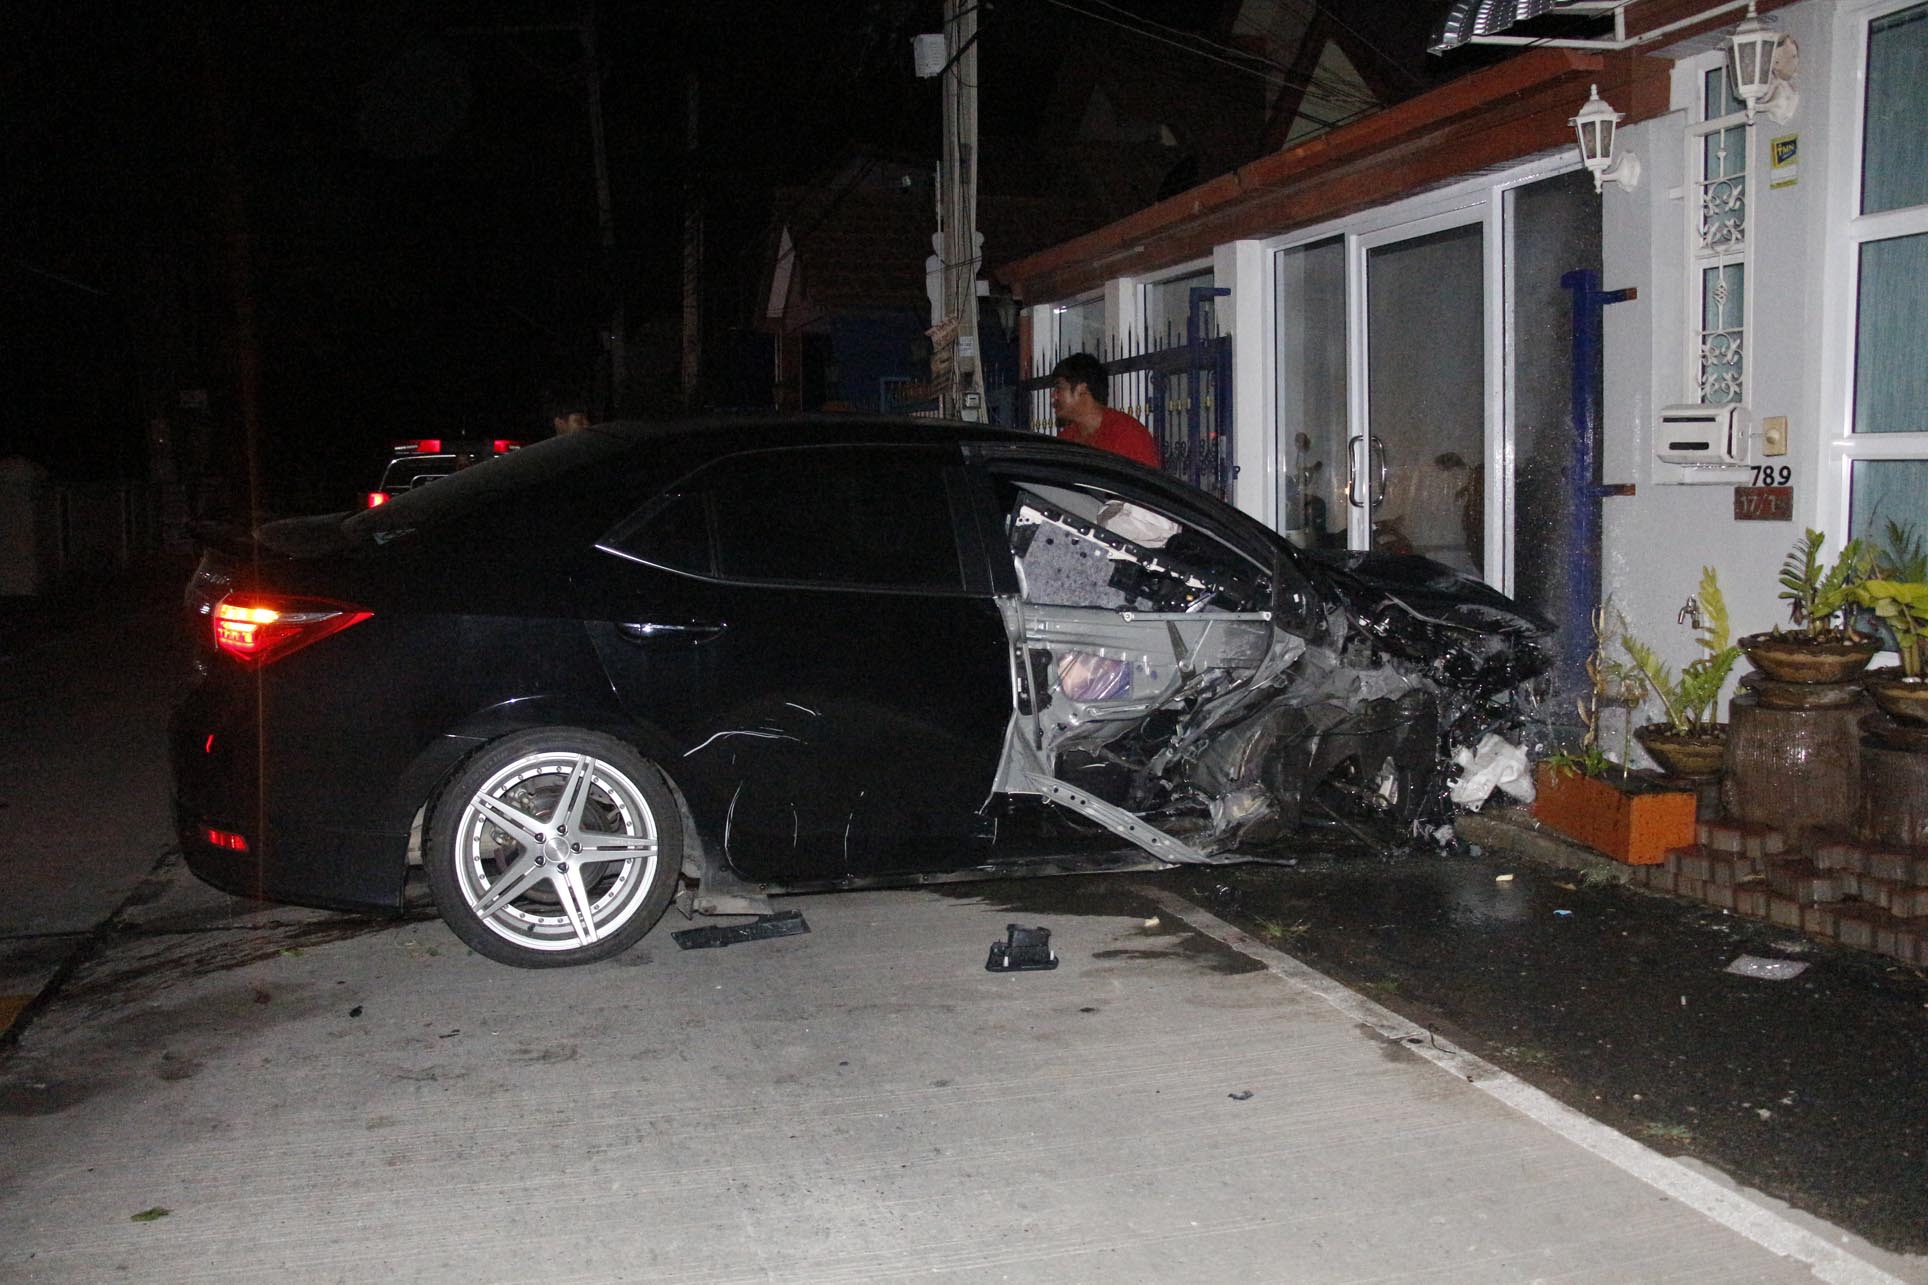 Nongprue police are searching for the driver of this car after the driver downed two power poles and fled the scene.